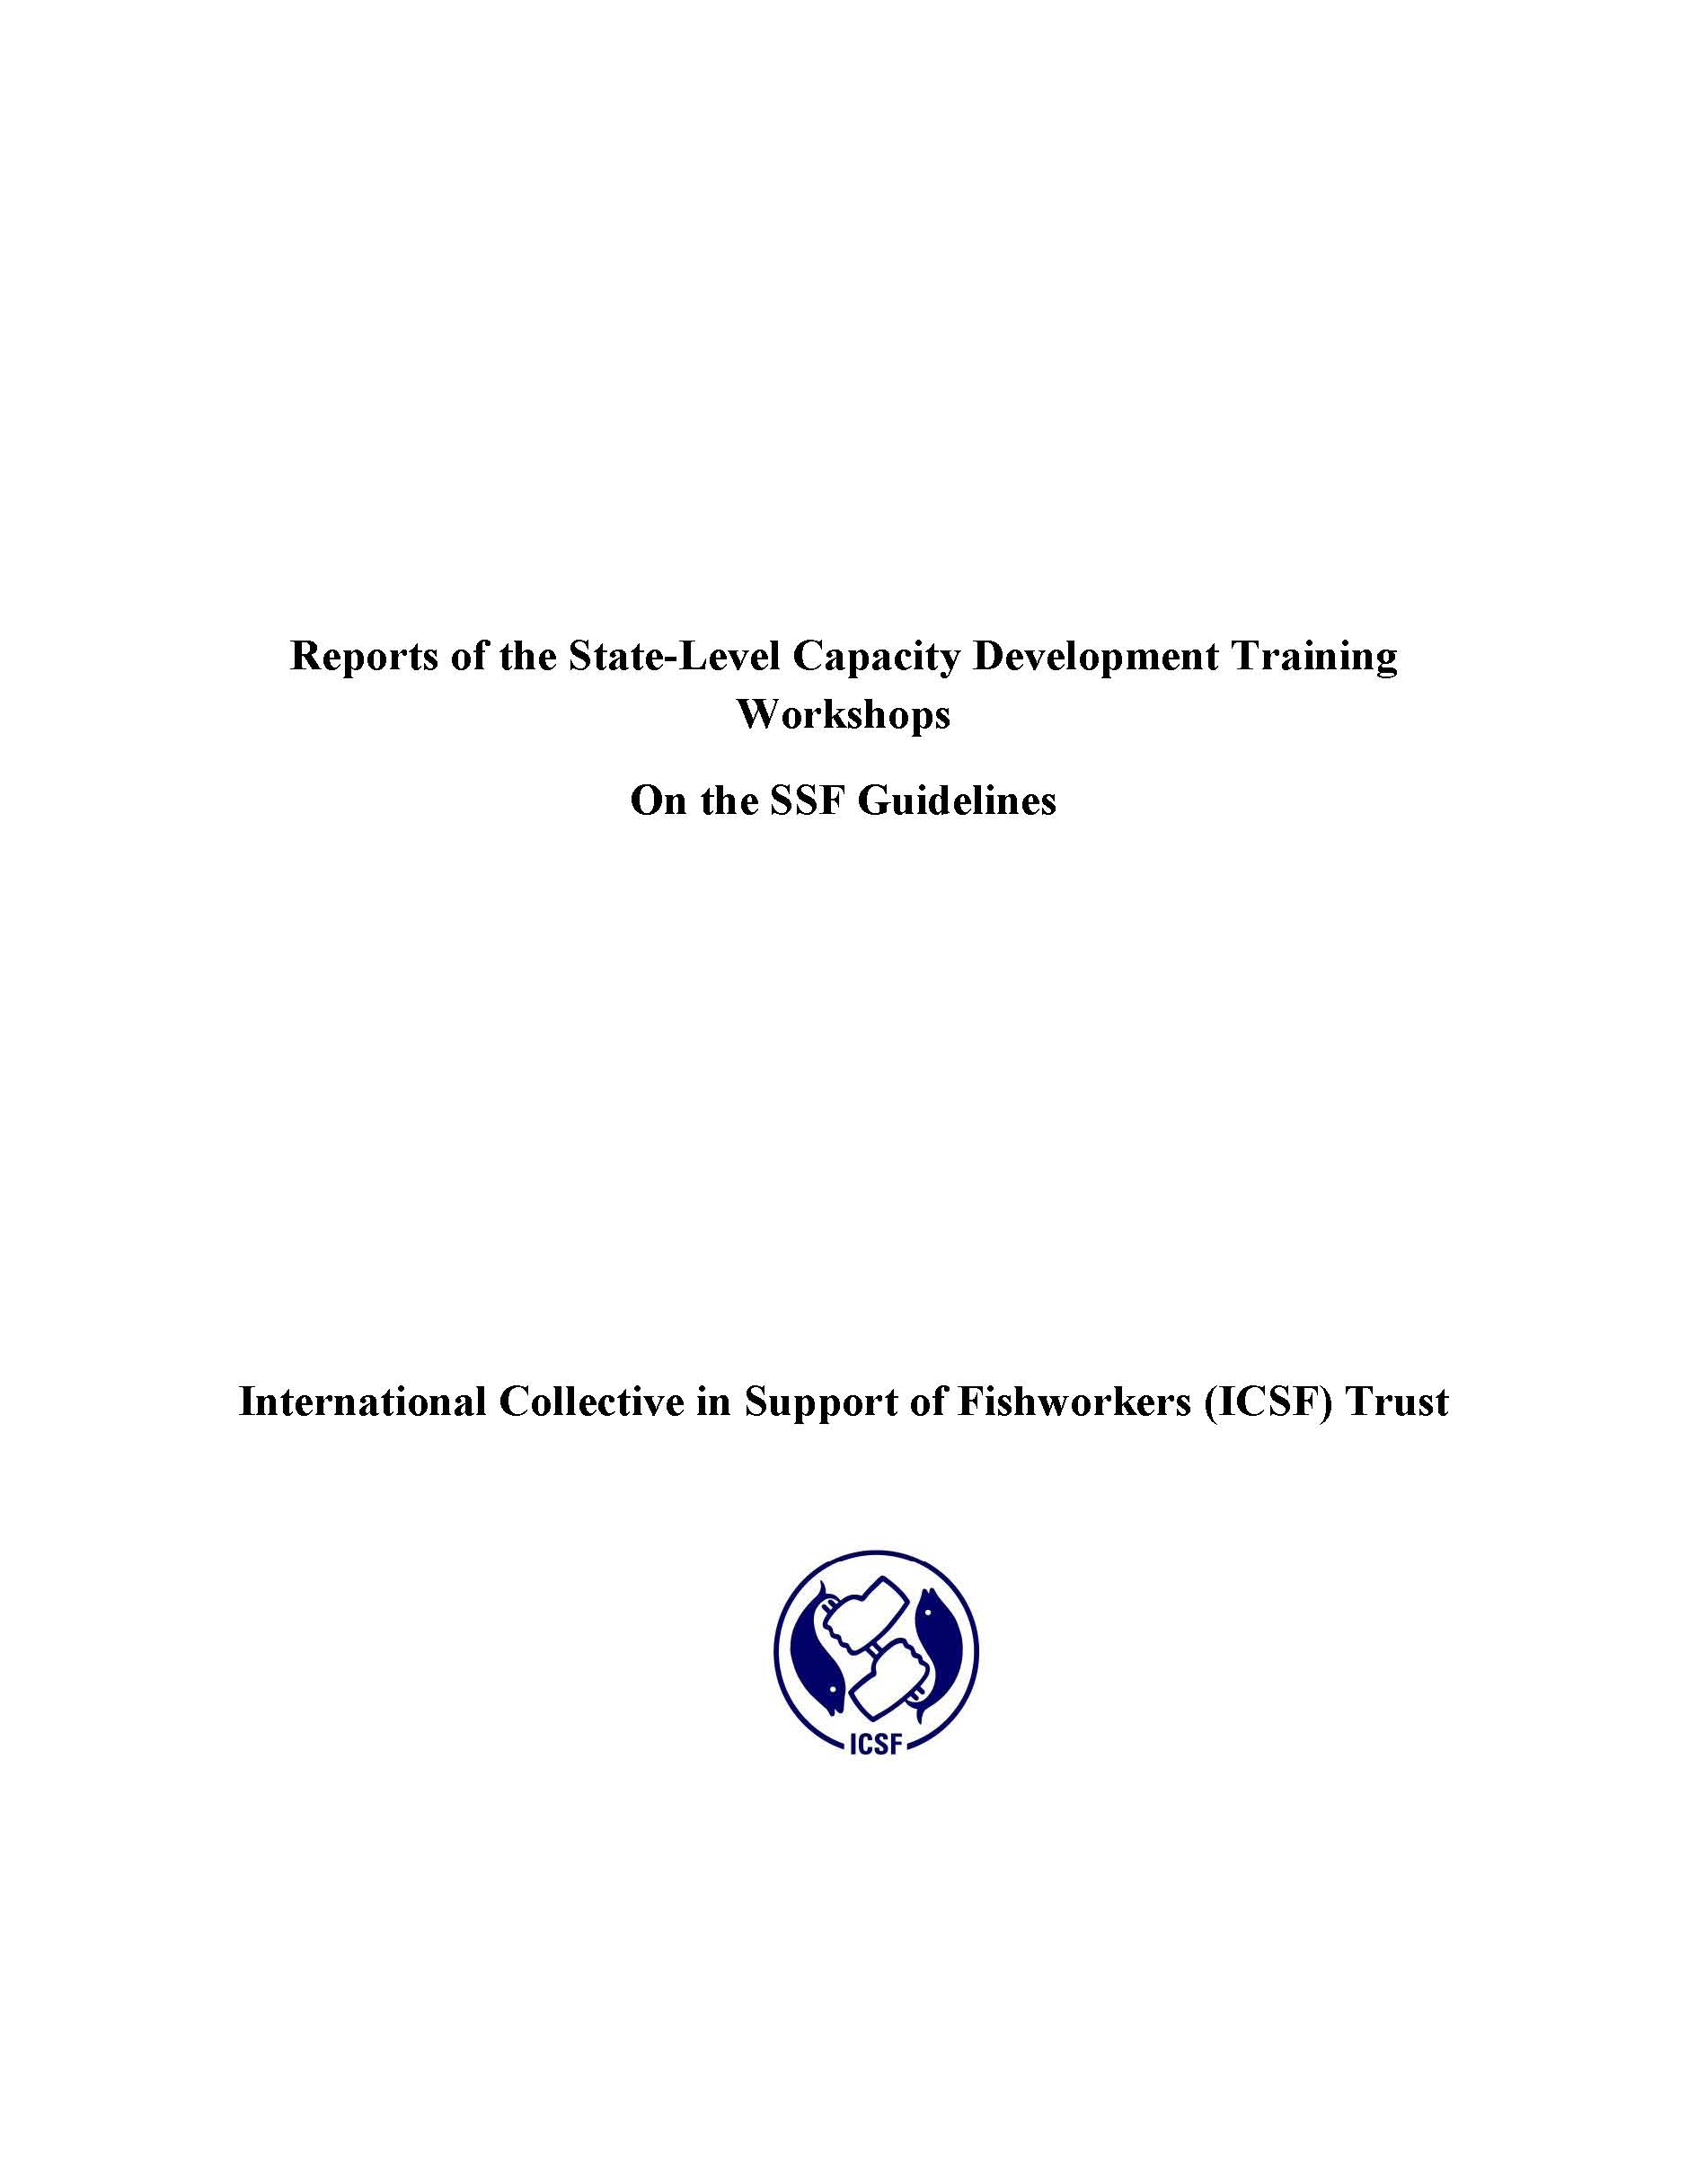 Reports of the State-Level Capacity Development Training Workshops on the SSF Guidelines